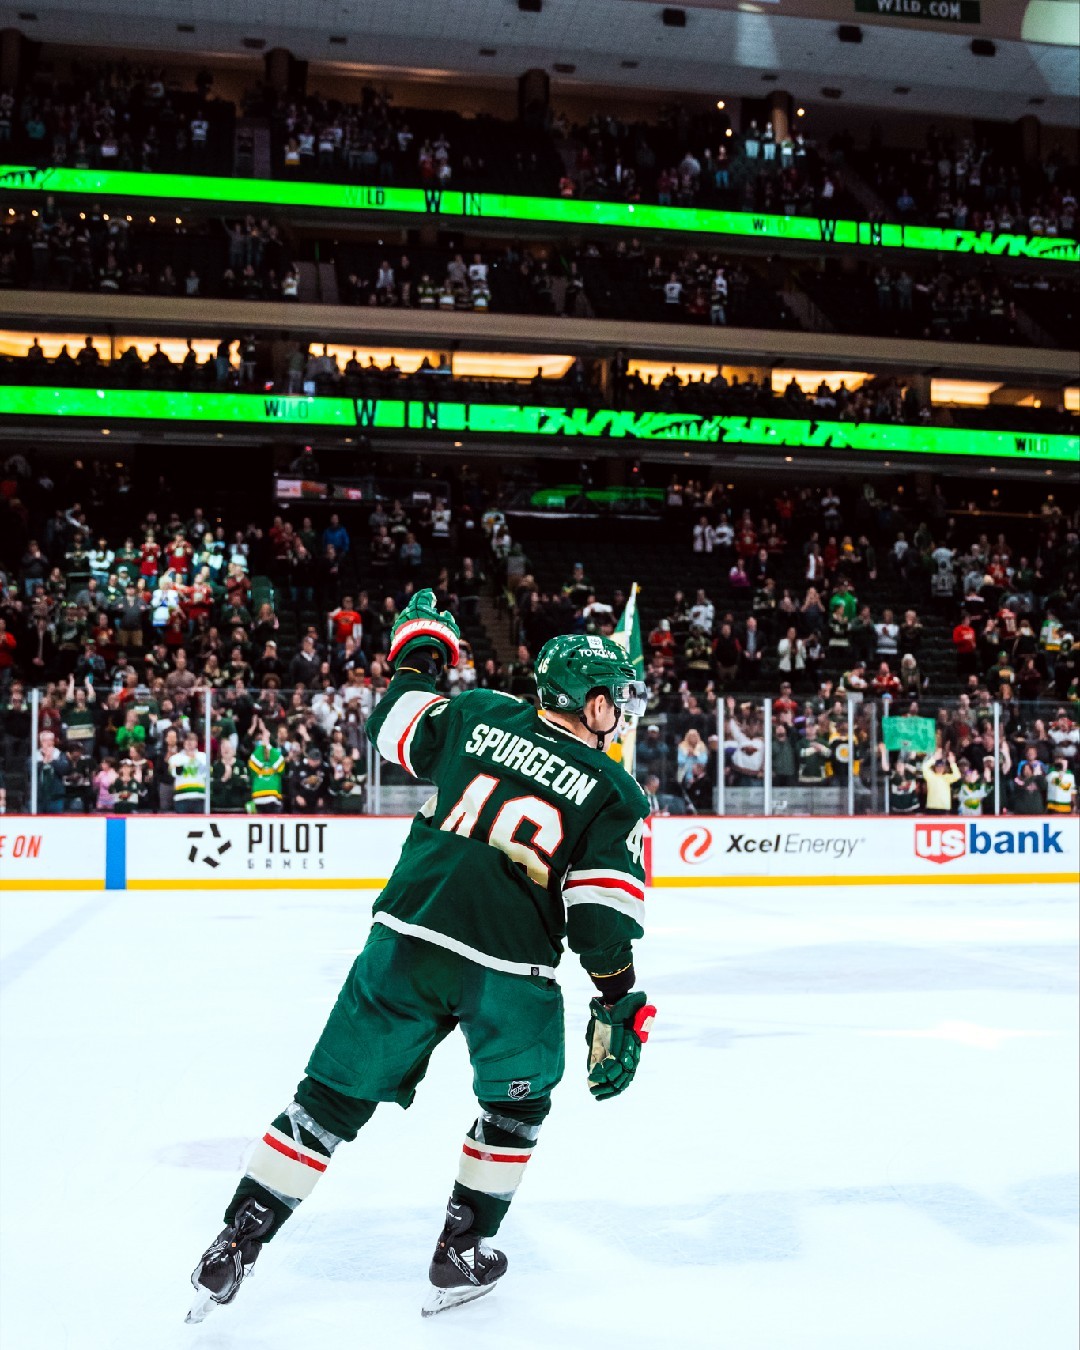 𝟠𝟘 days and counting  #mnwild...